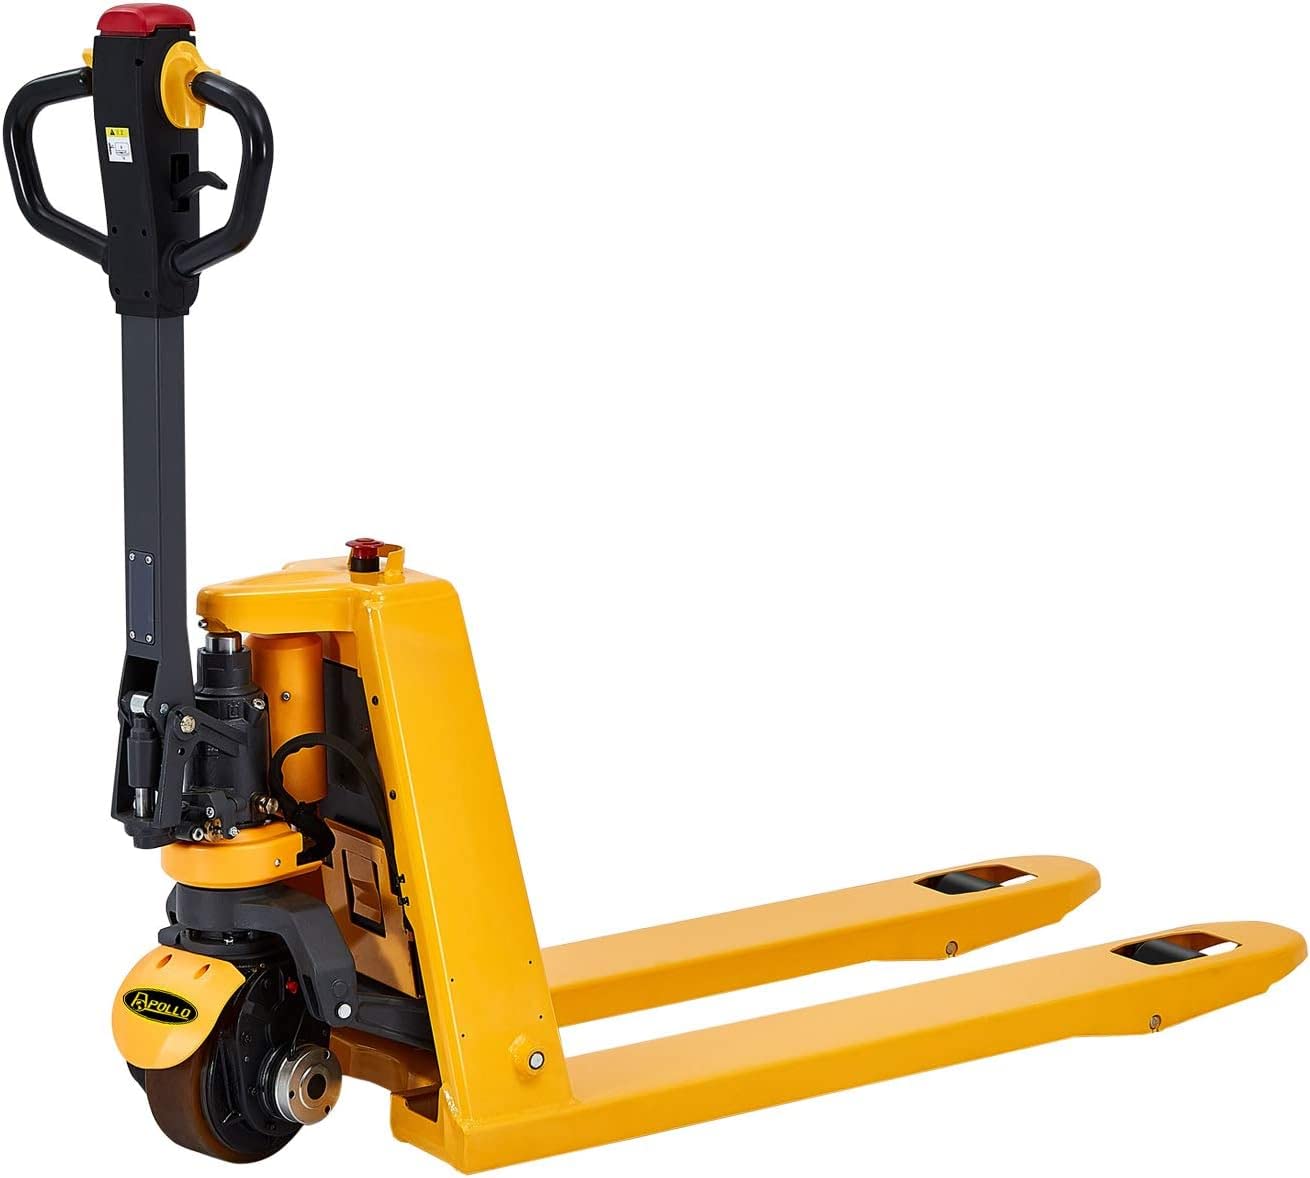 APOLLOLIFT Handle of Classic Electric Power Lithium Battery Pallet Jack Truck 3300lb Cap. 48" x27"Fork Size